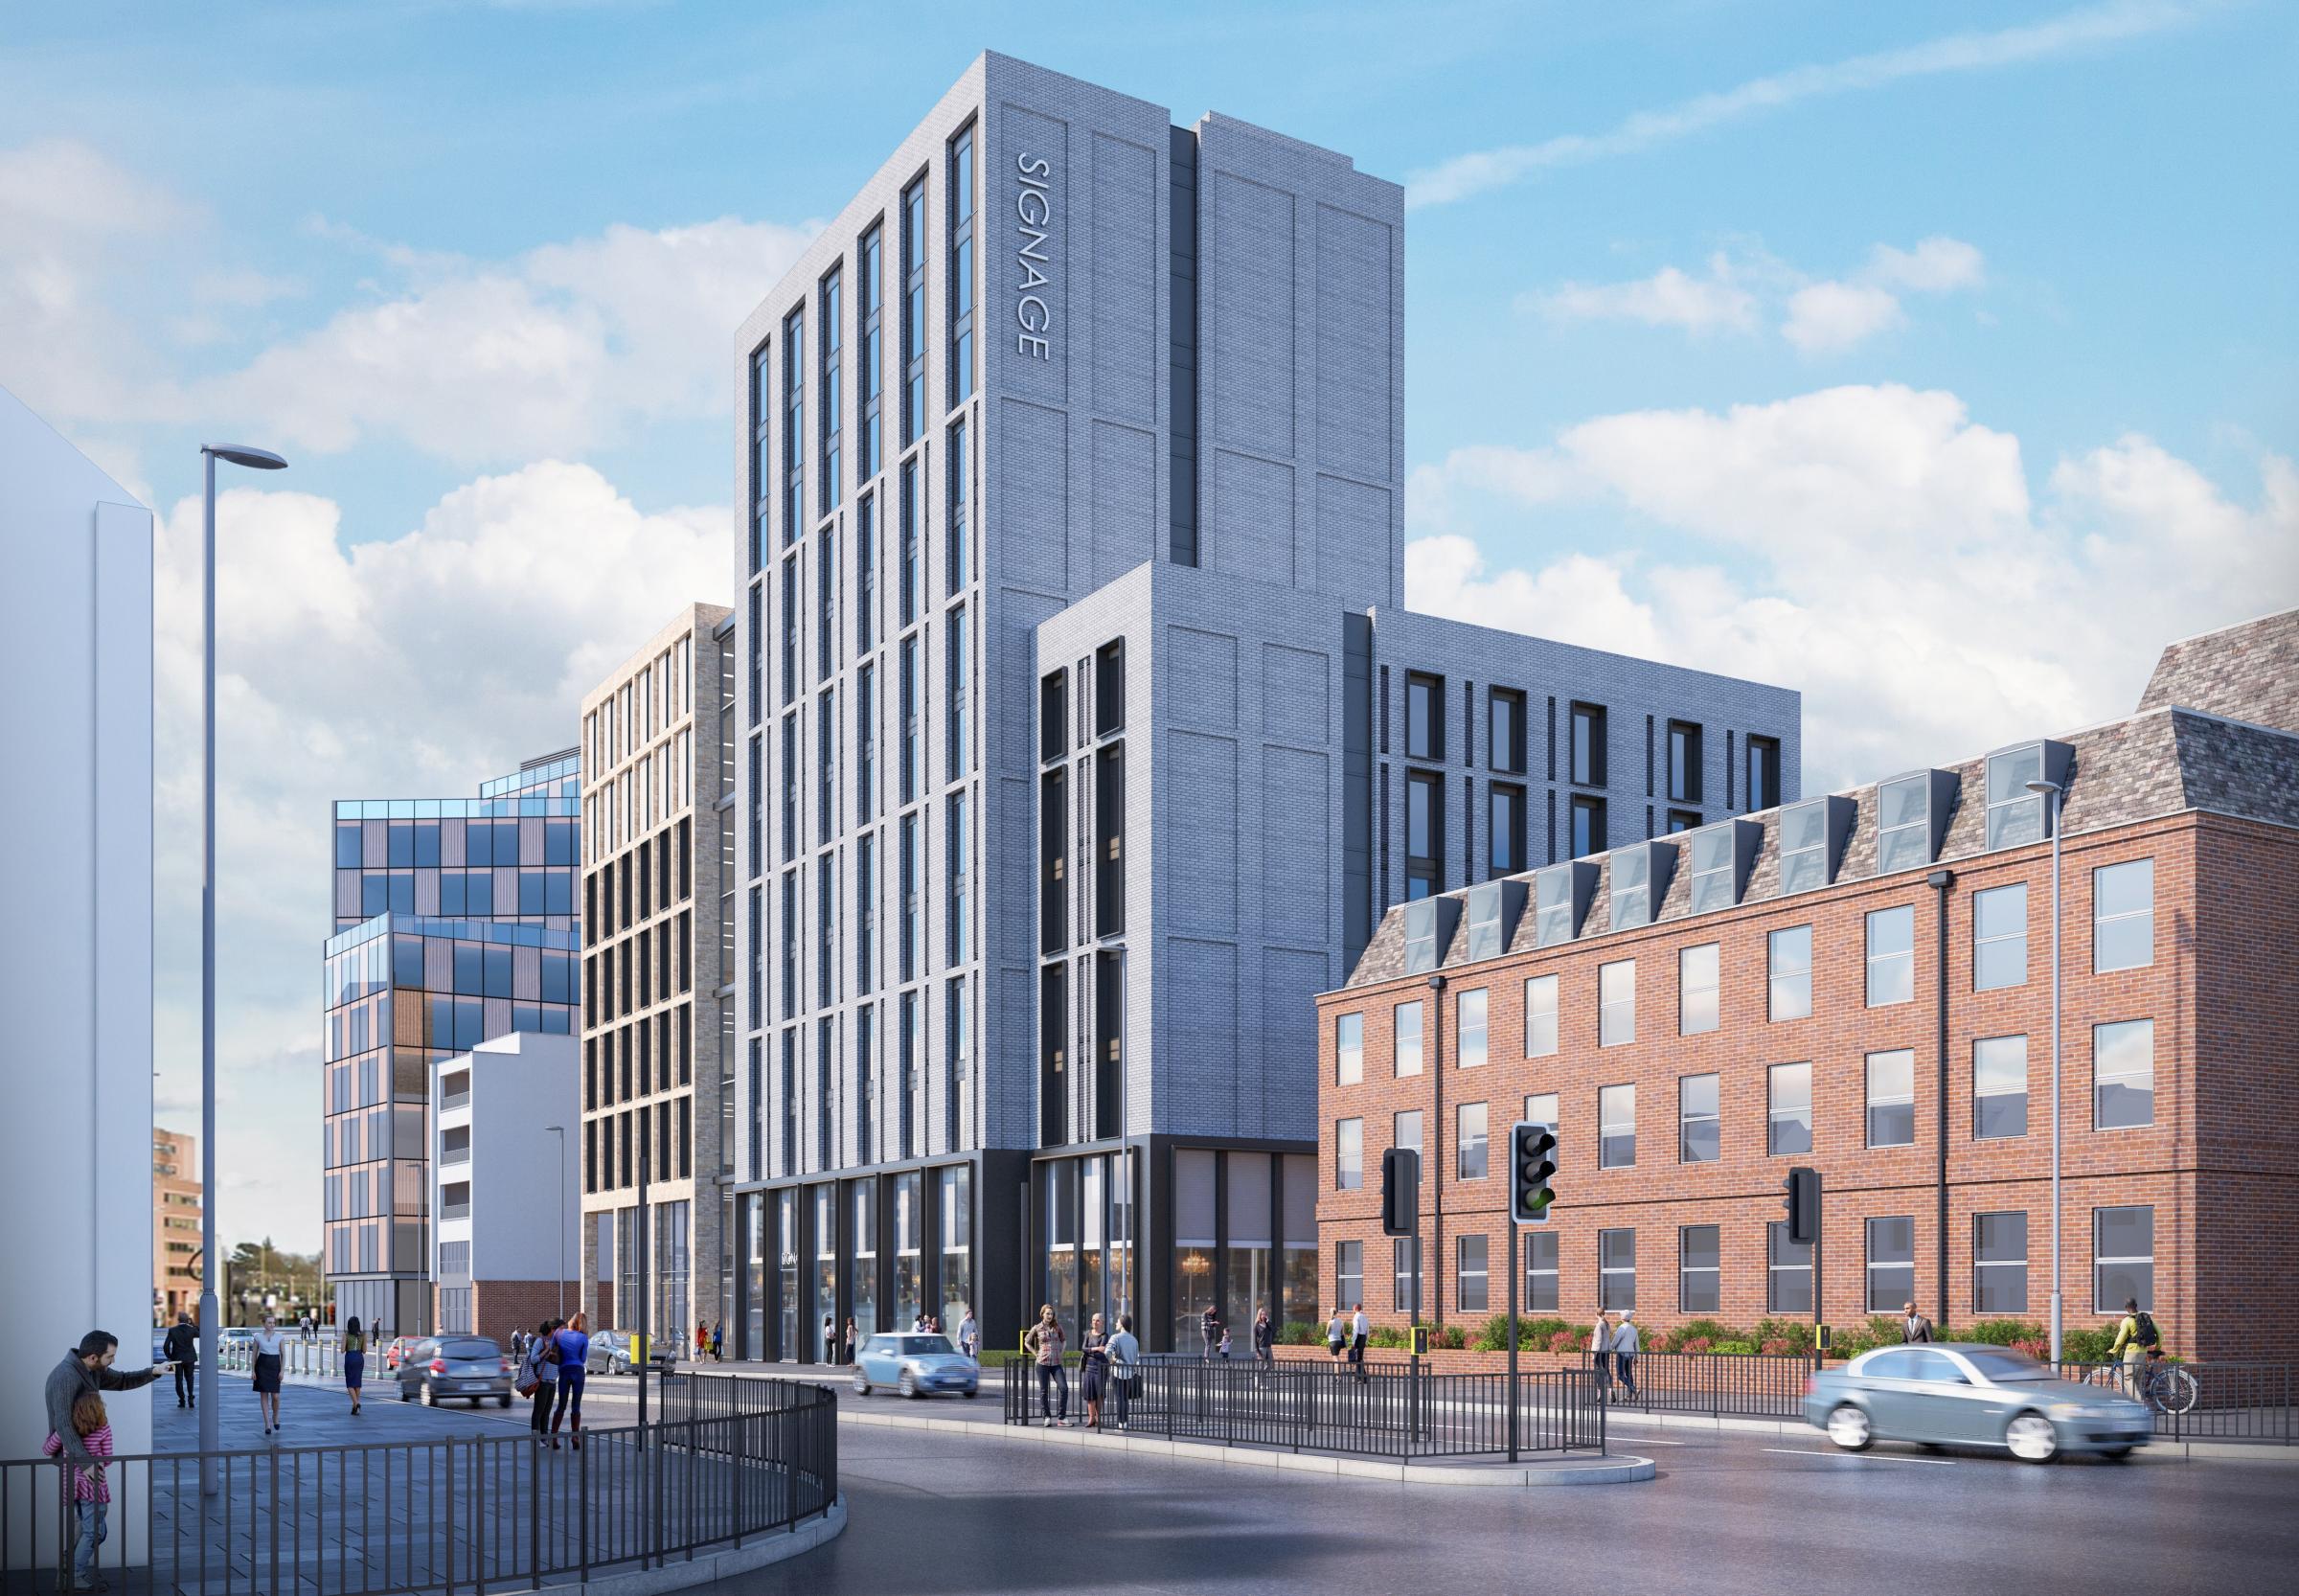 The CGI of the development to replace Cassiobury House. Credit: Tellon Capital